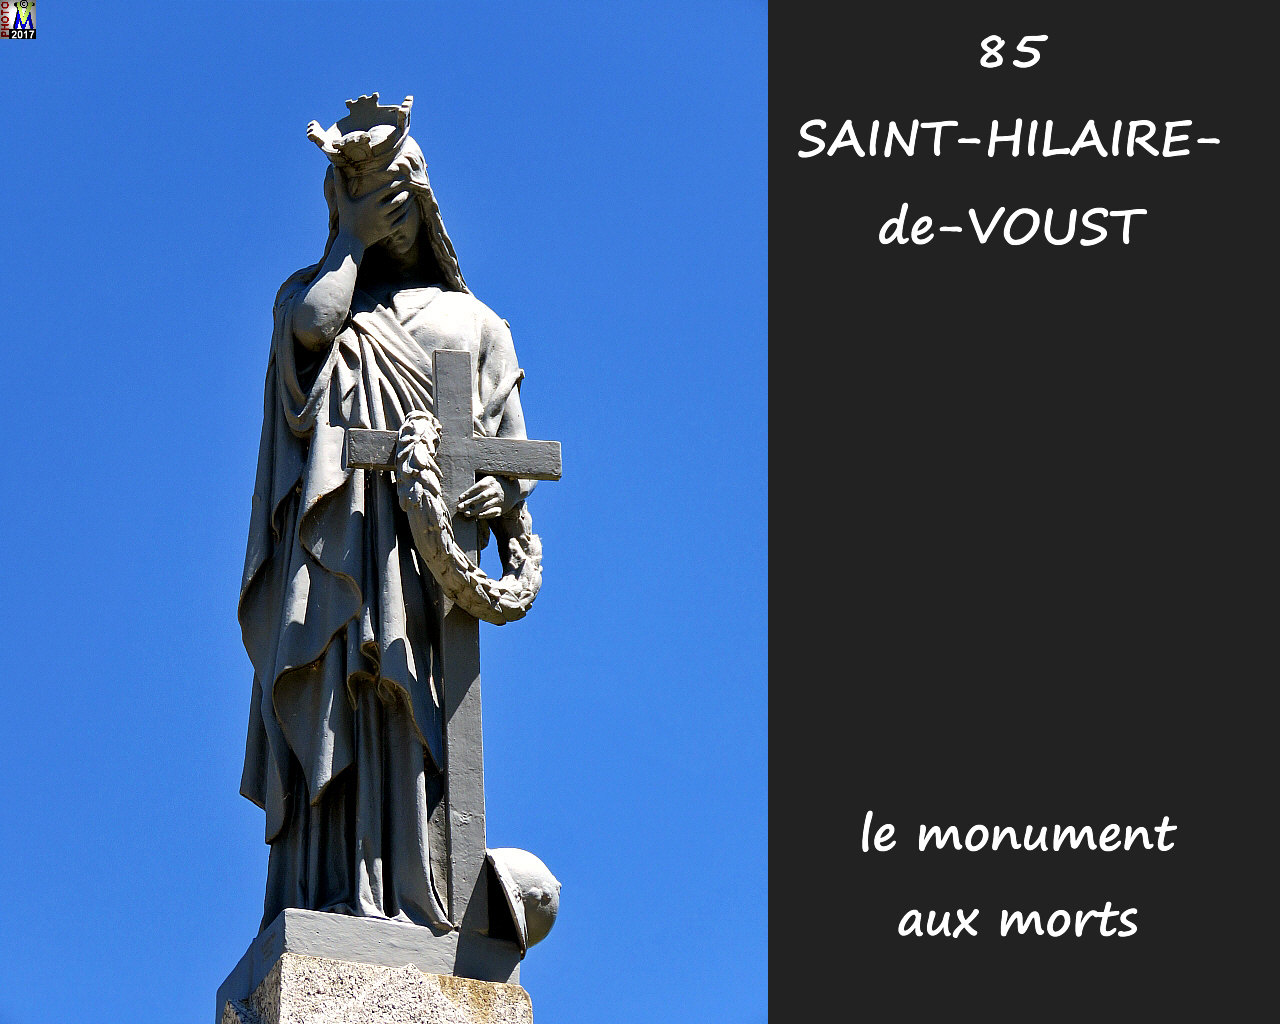 85StHILAIRE-VOUST_morts_1002.jpg